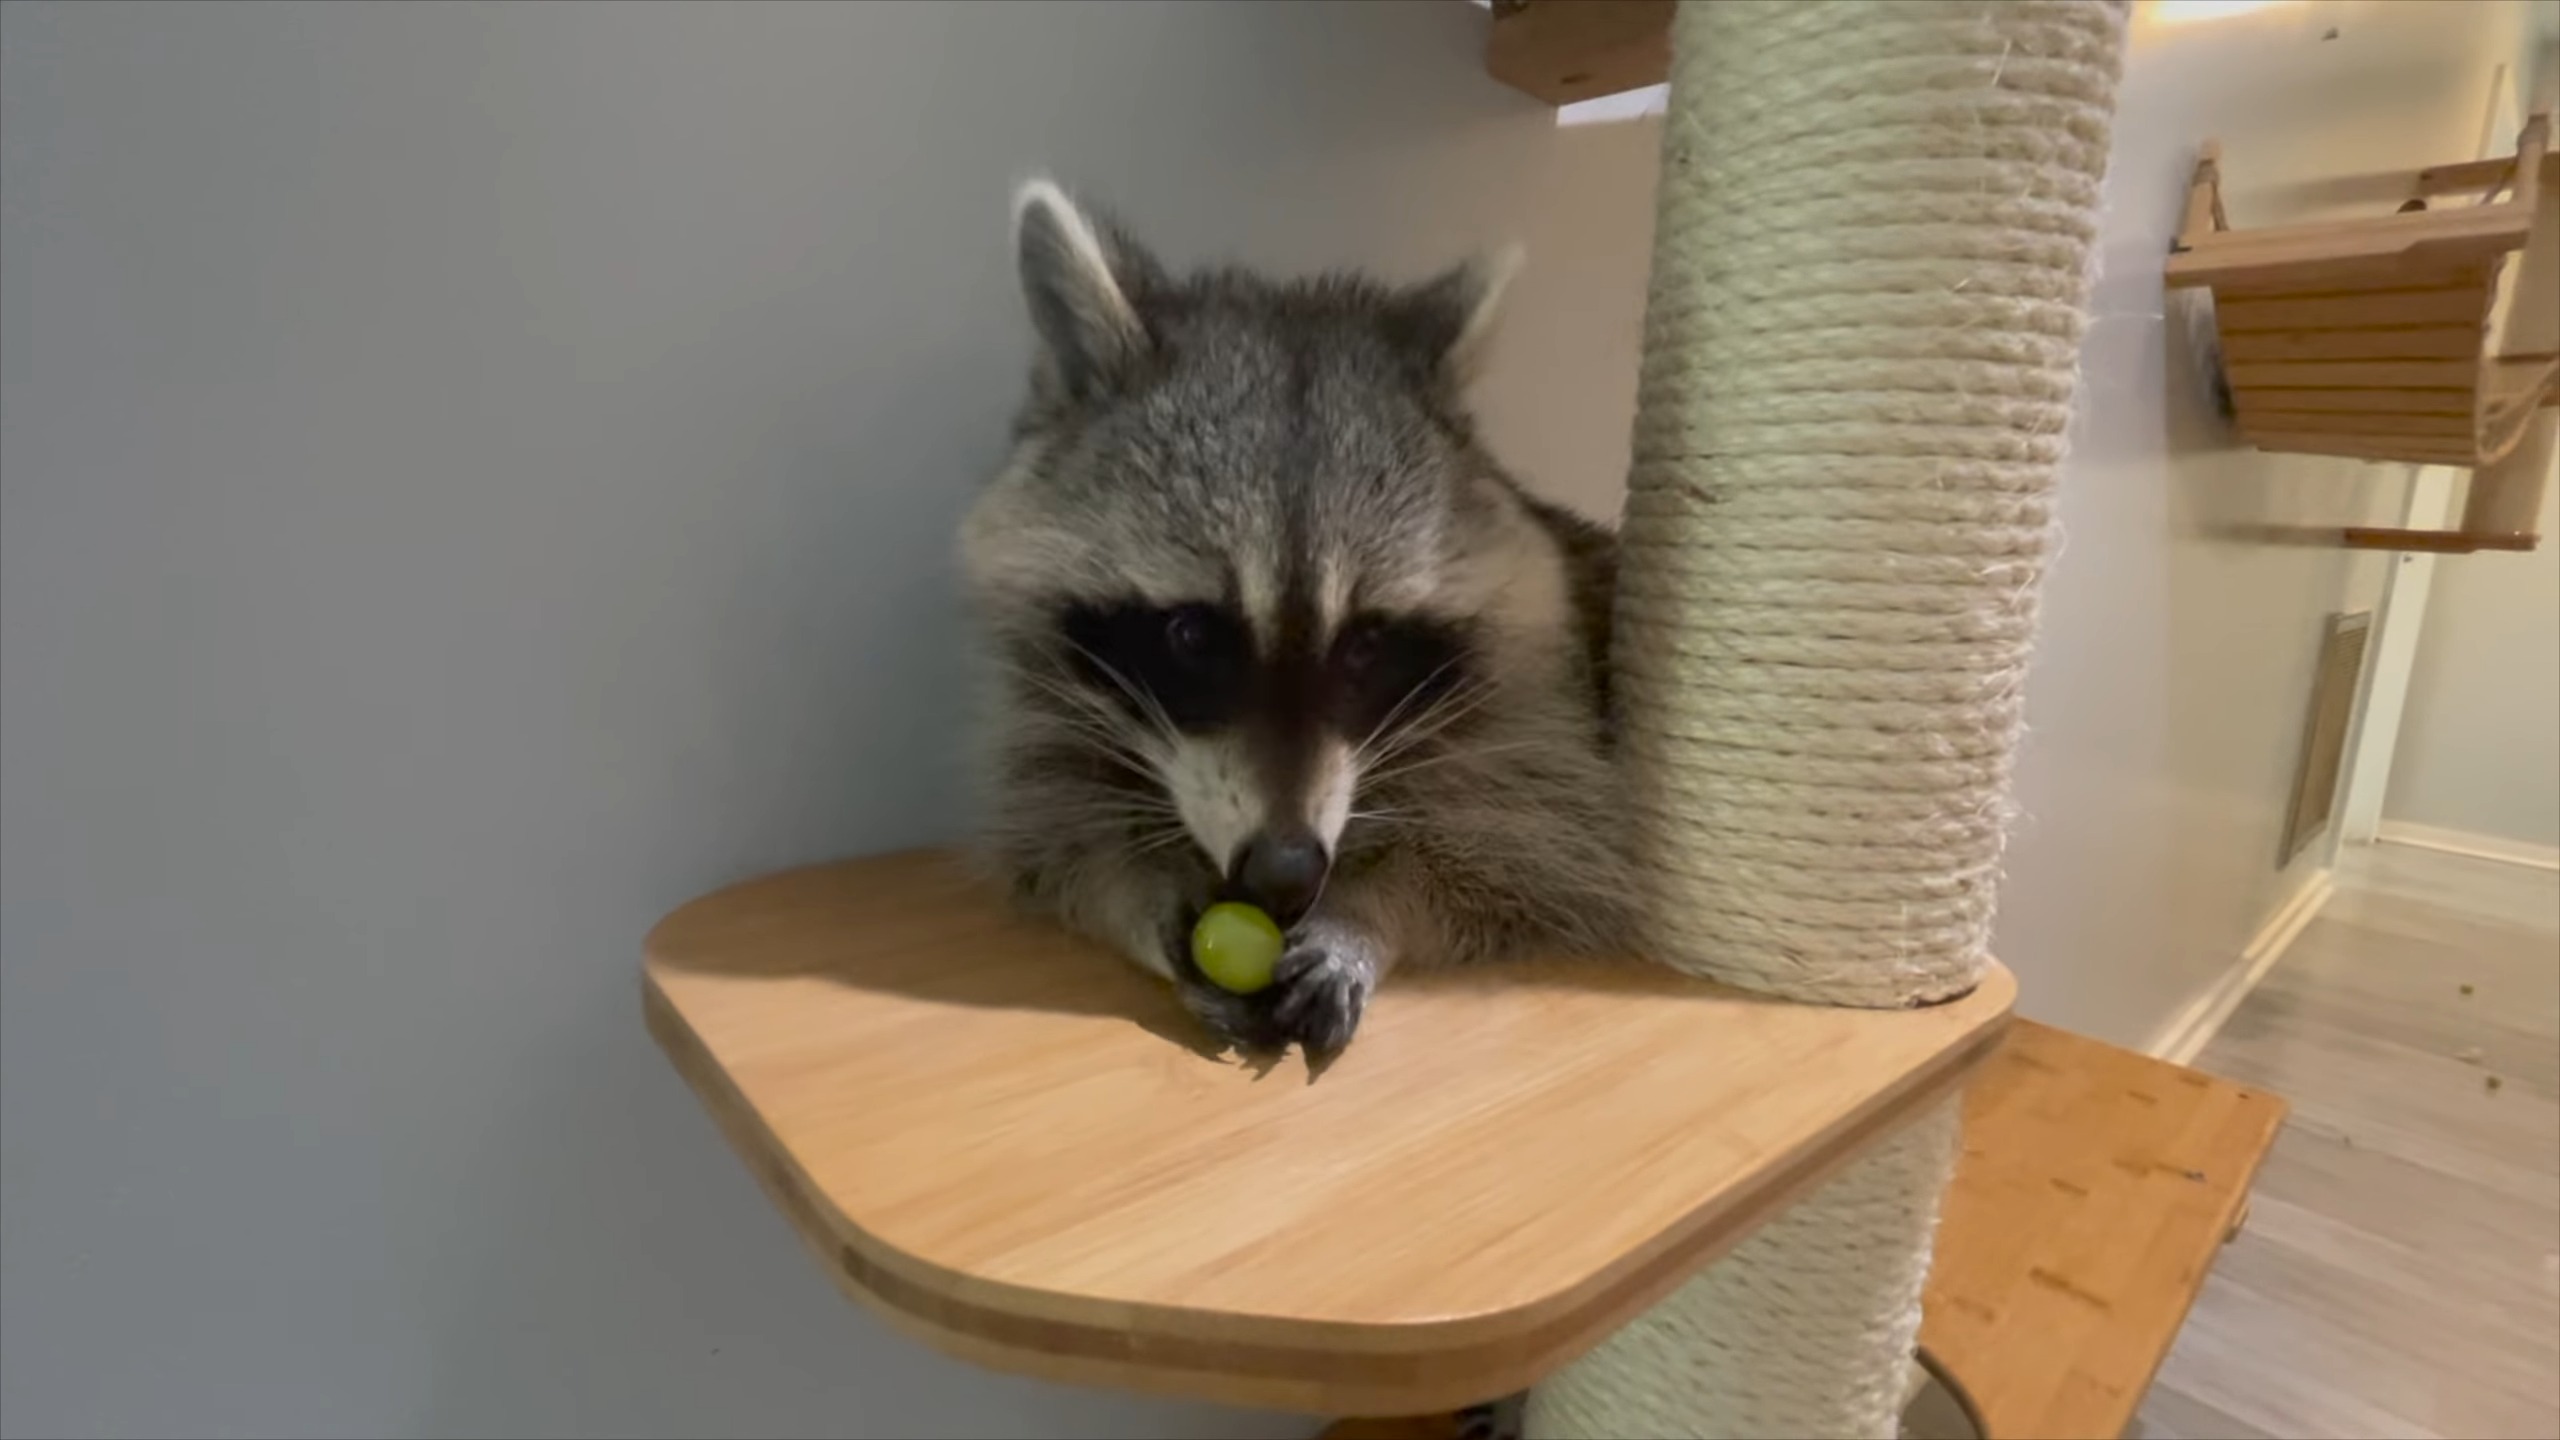 Playful side of Raccoons